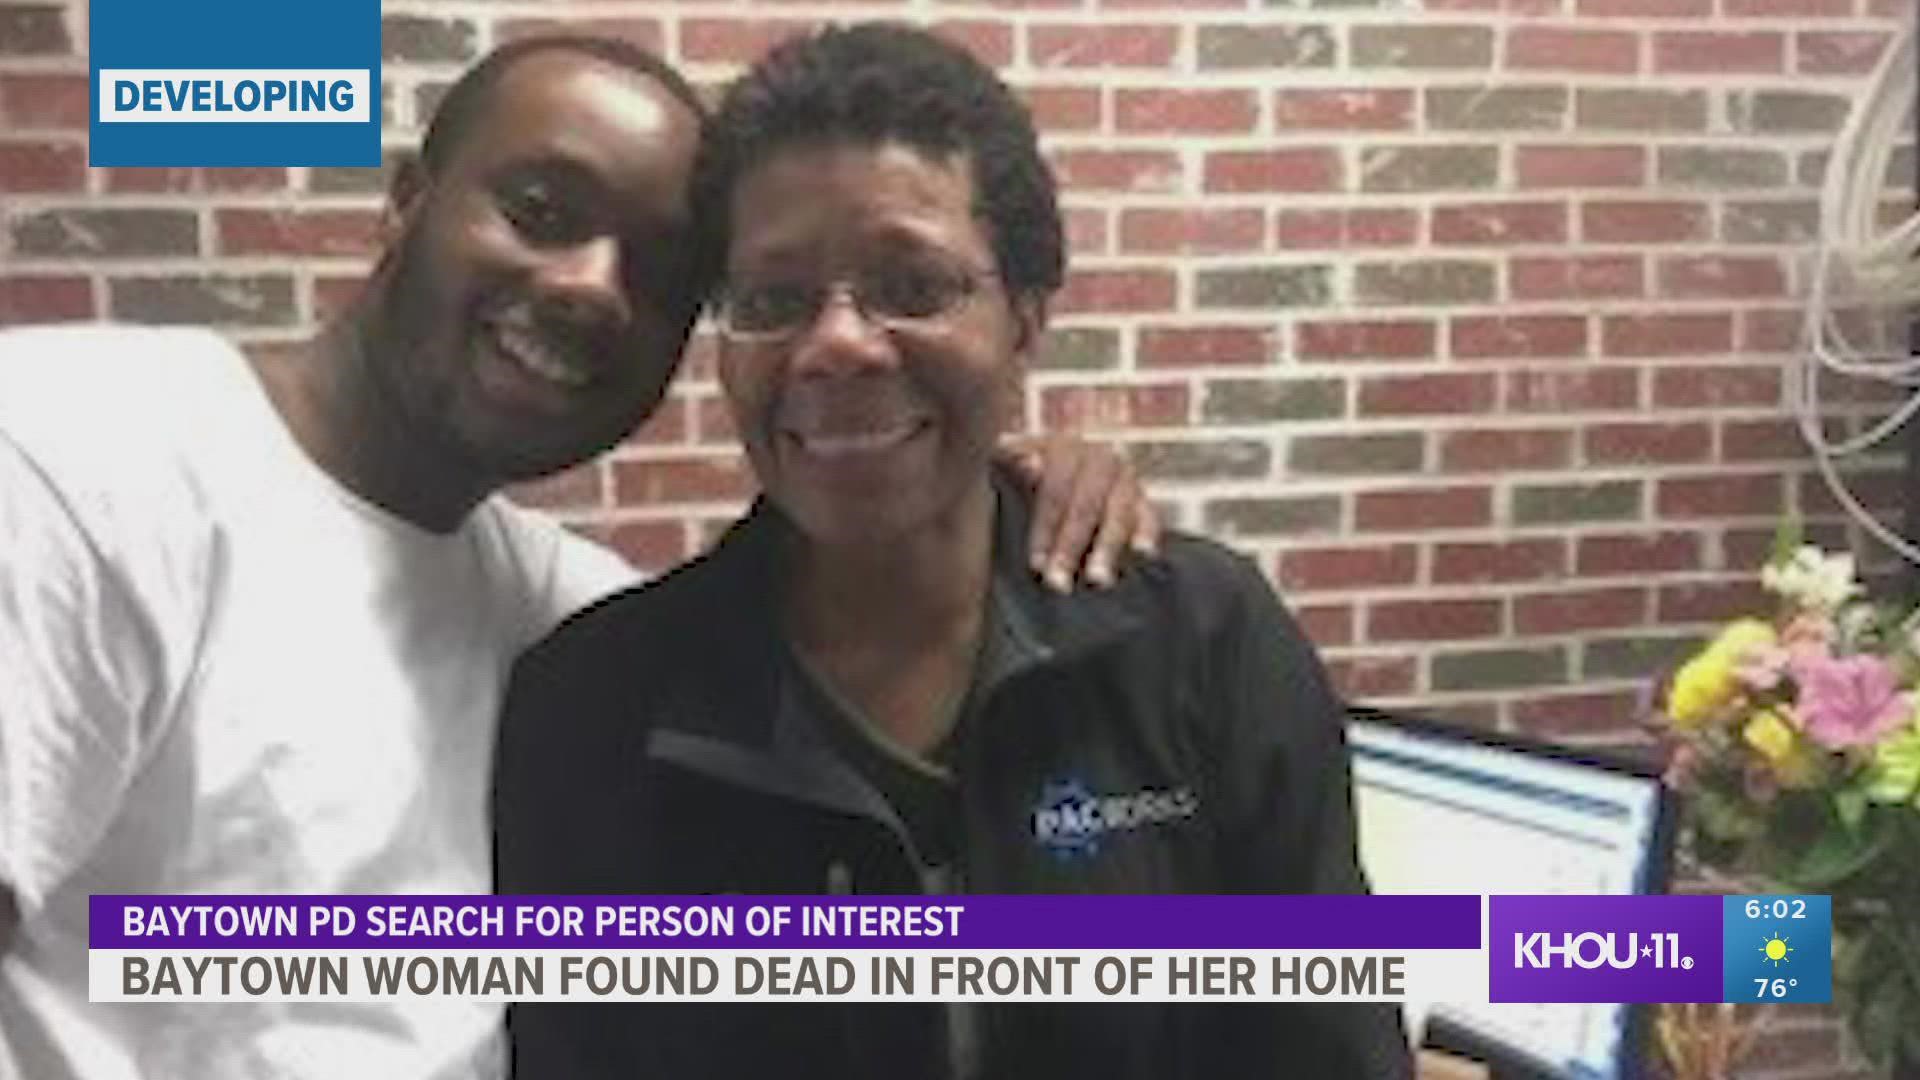 The family of the victim, who has been identified as Roxann Russell Inniss, believes she may have been targeted.